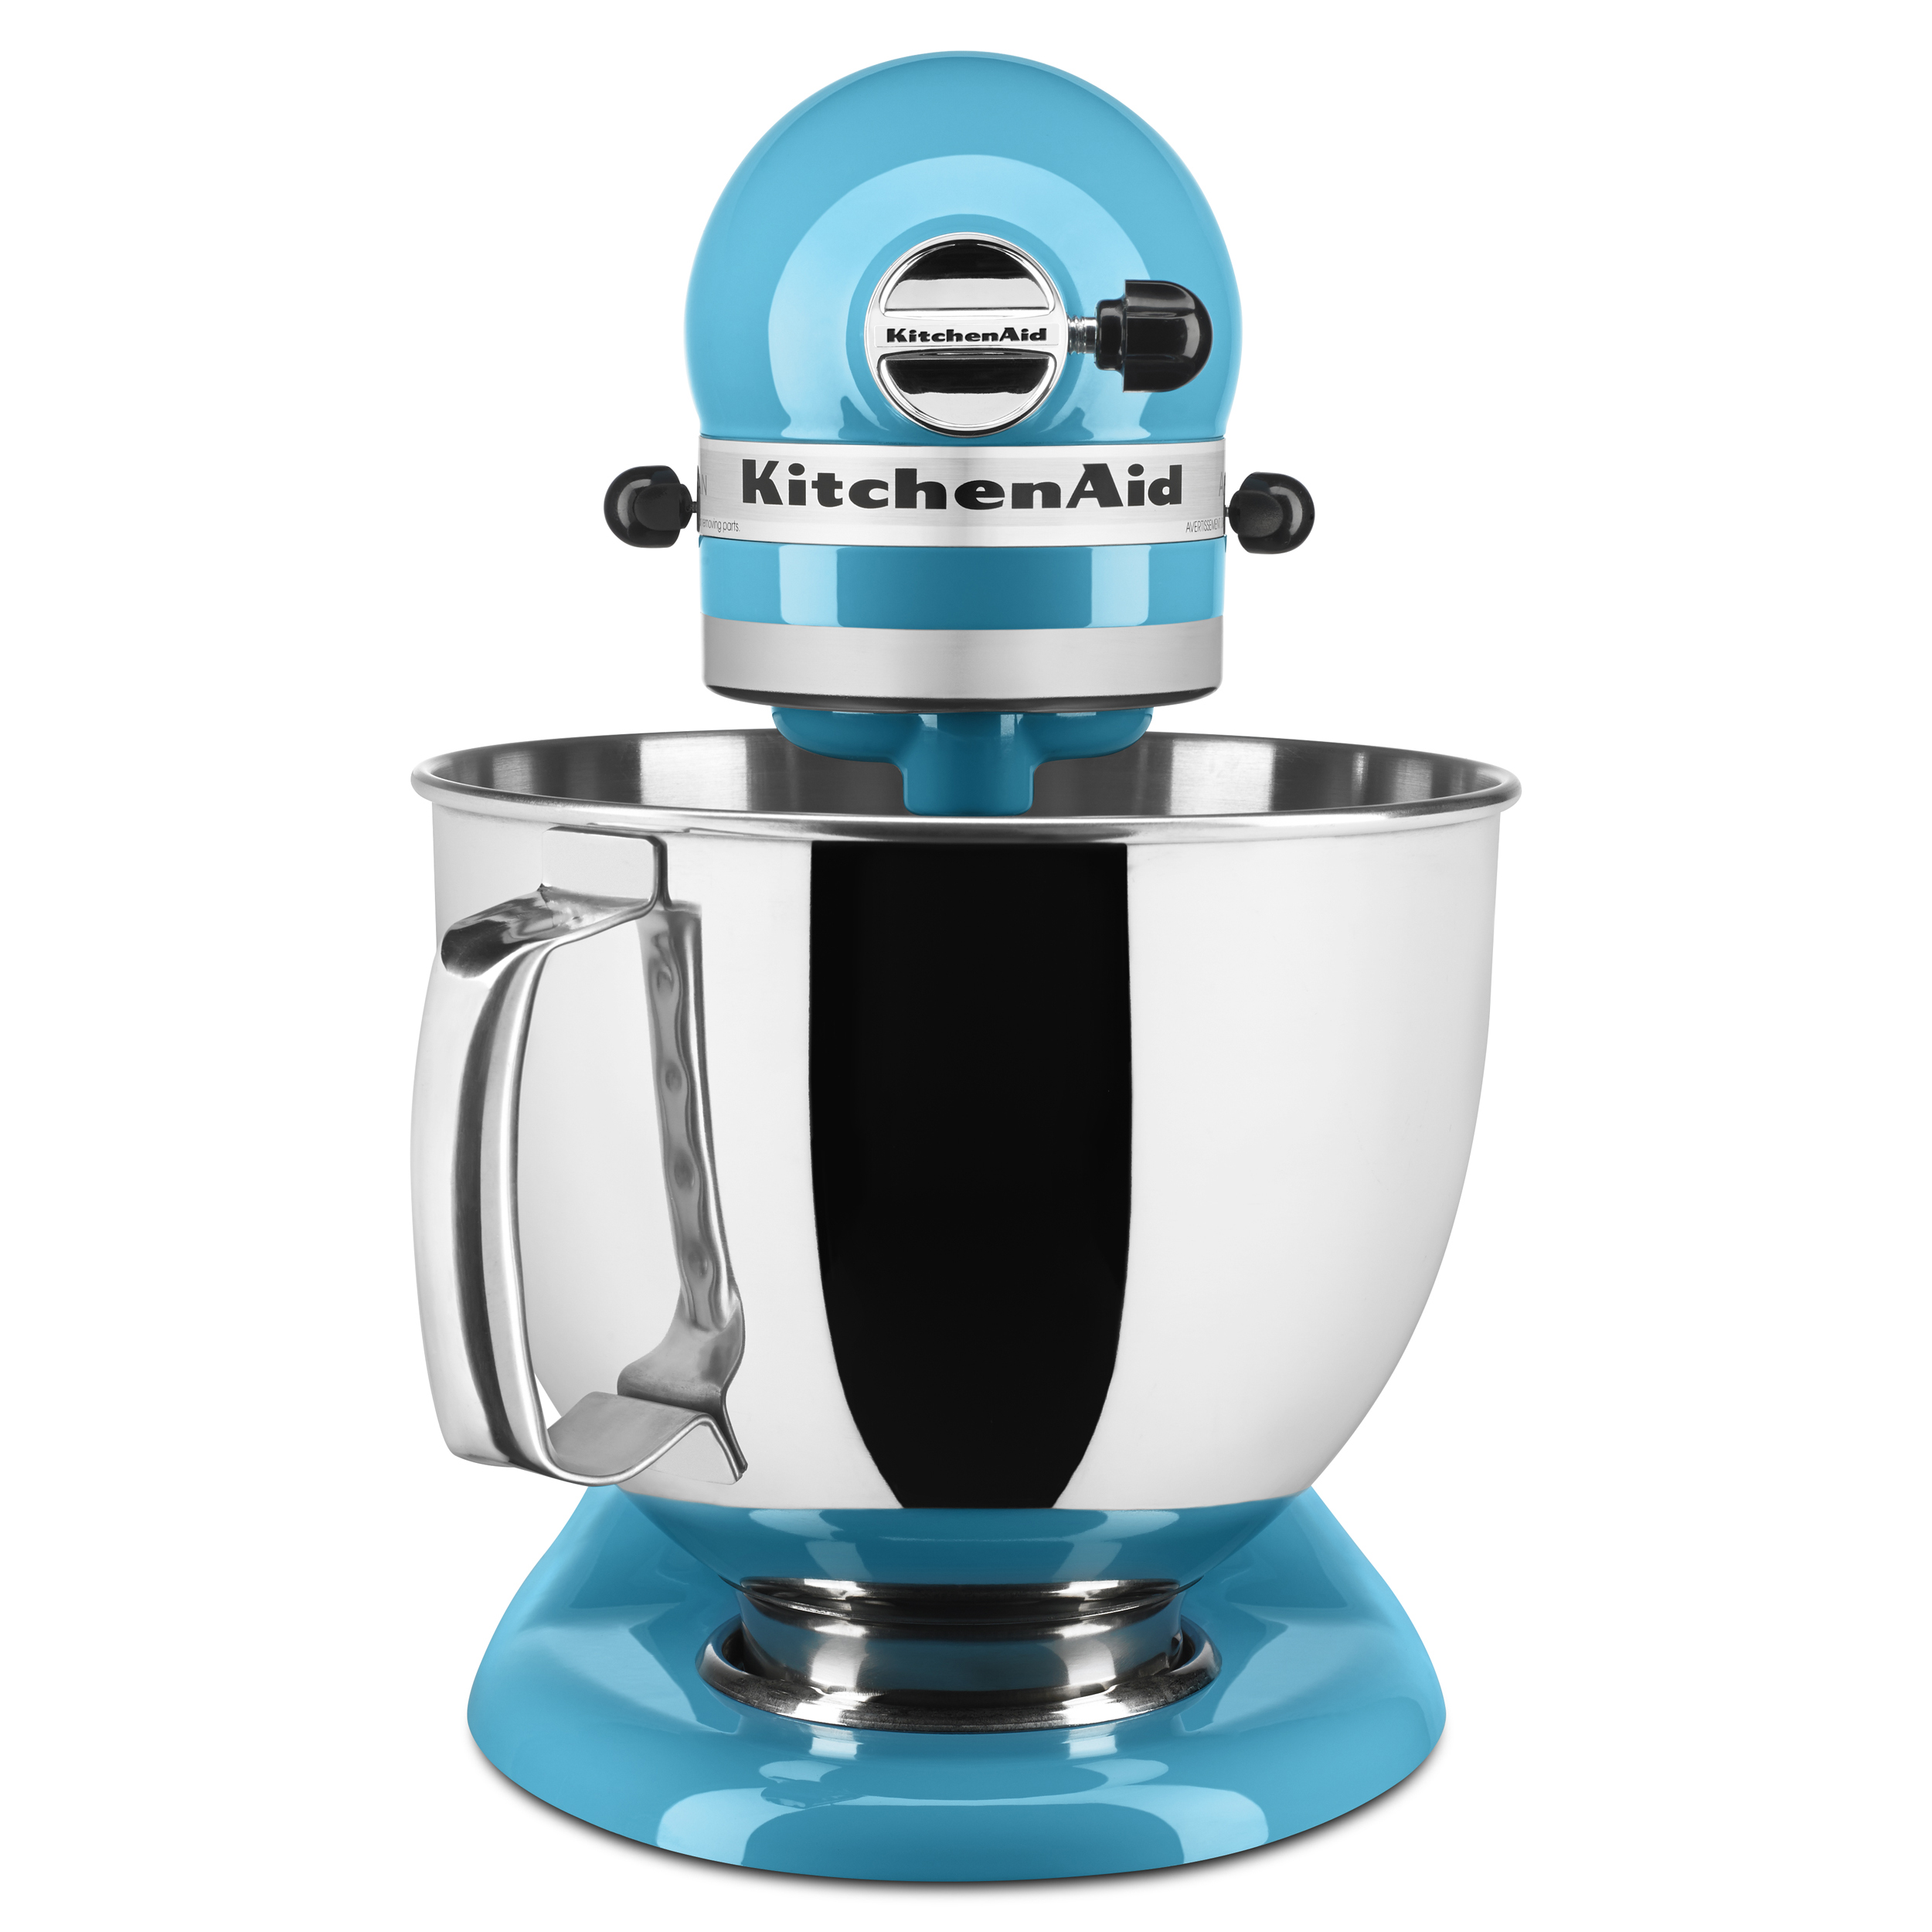 KitchenAid Artisan Series 5-Quart Tilt-Head Stand Mixer in Crystal Blue - KSM150PSCL - Closeout - image 4 of 4